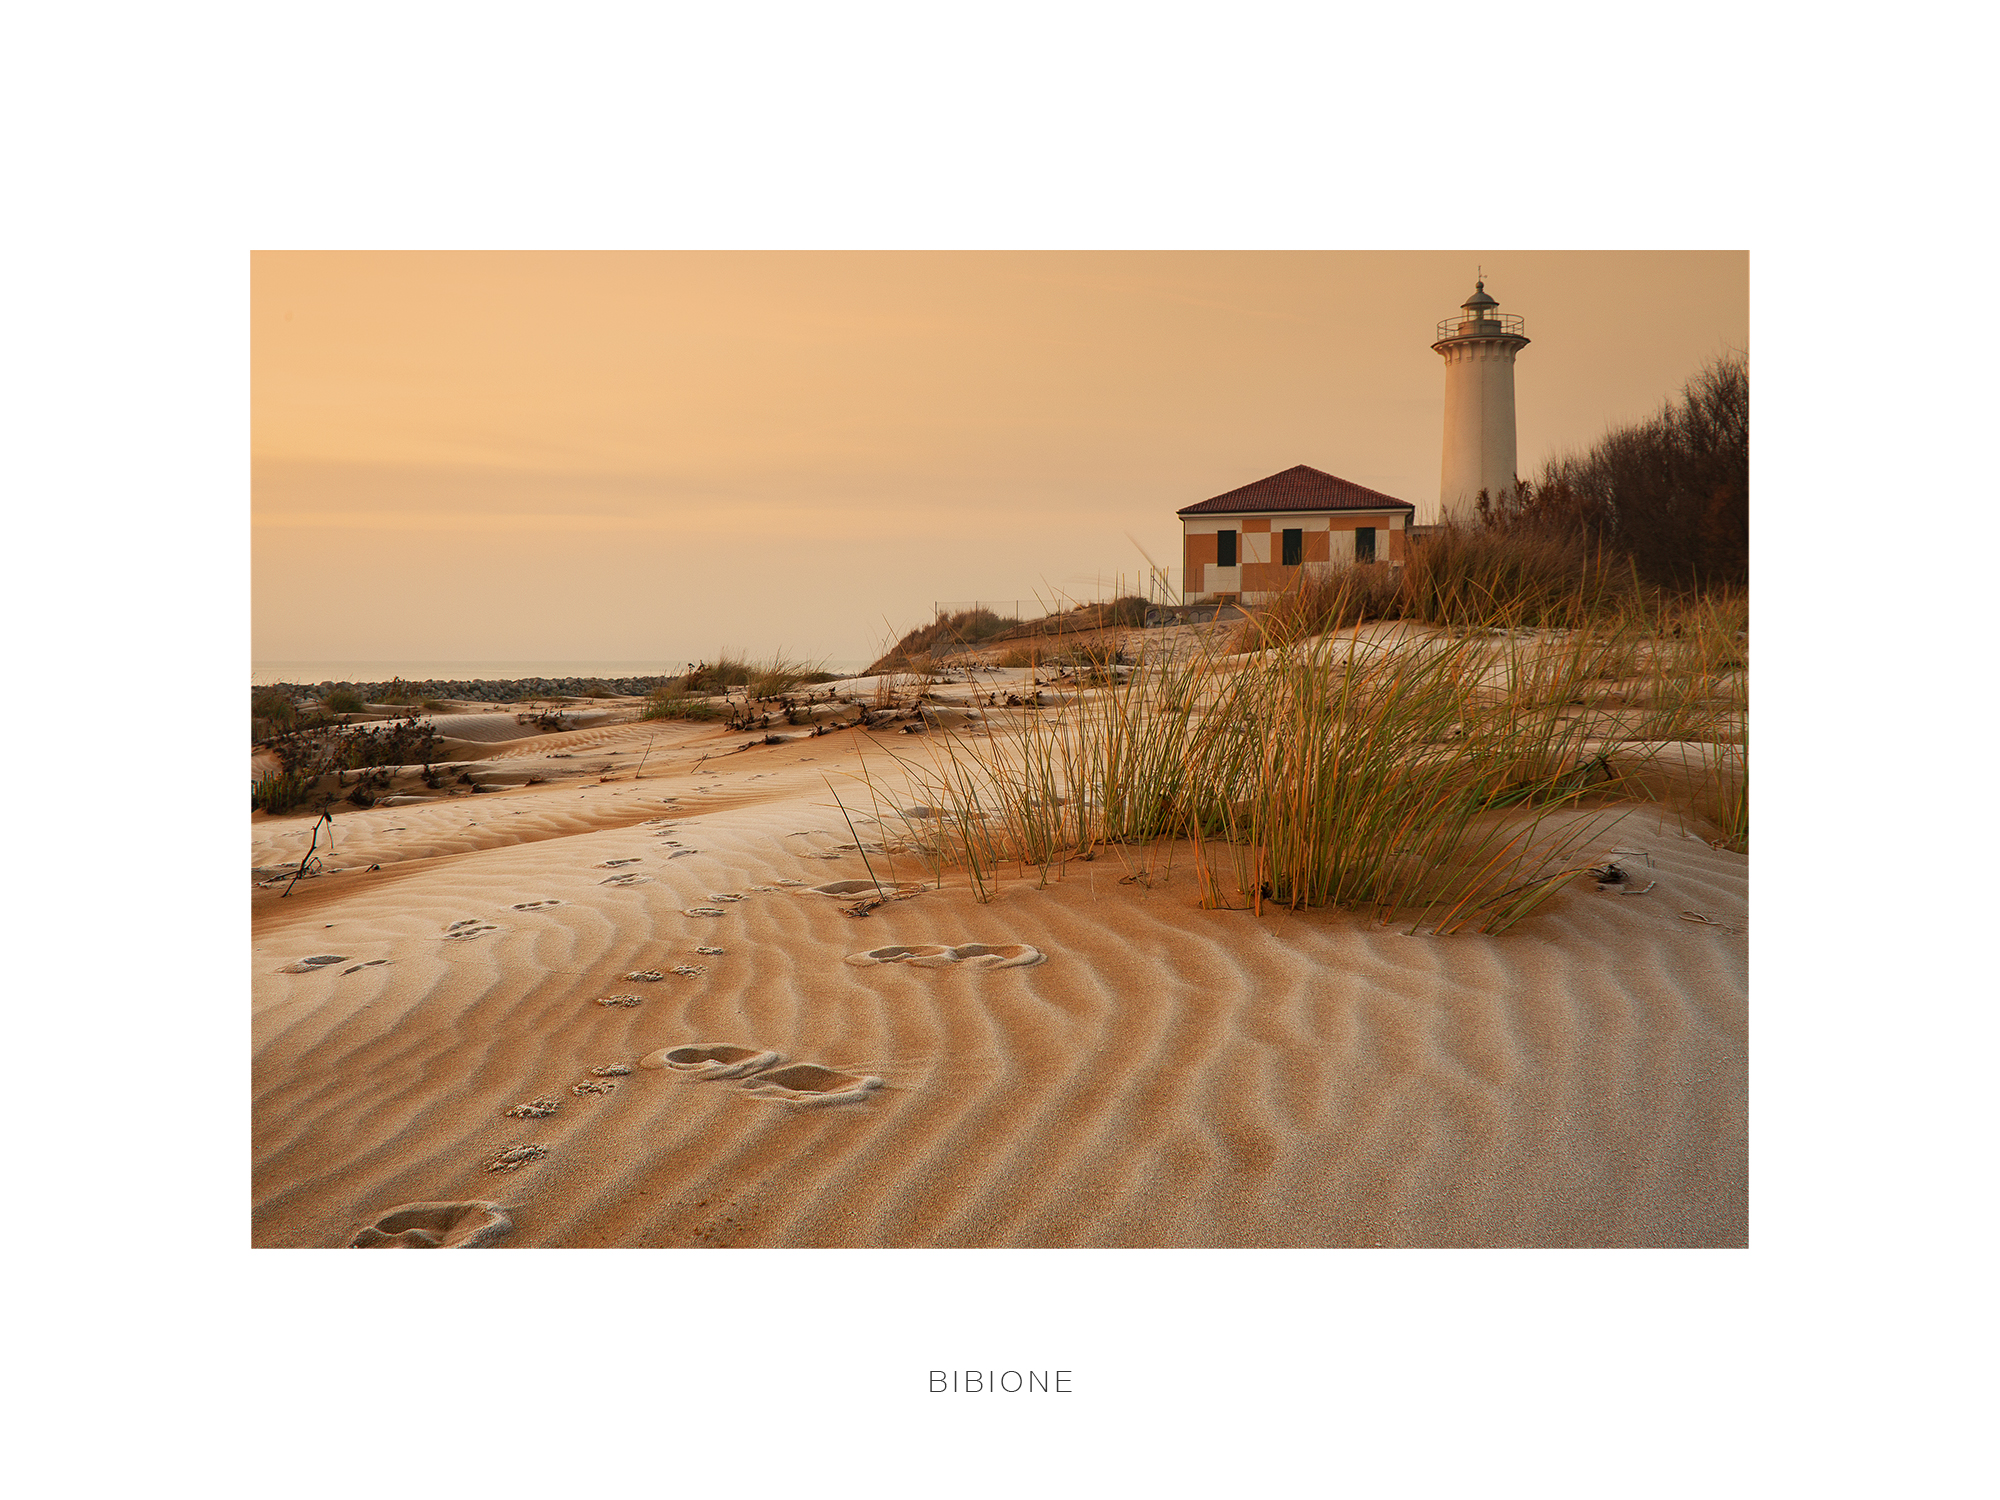 The Lighthouse of Bibione...